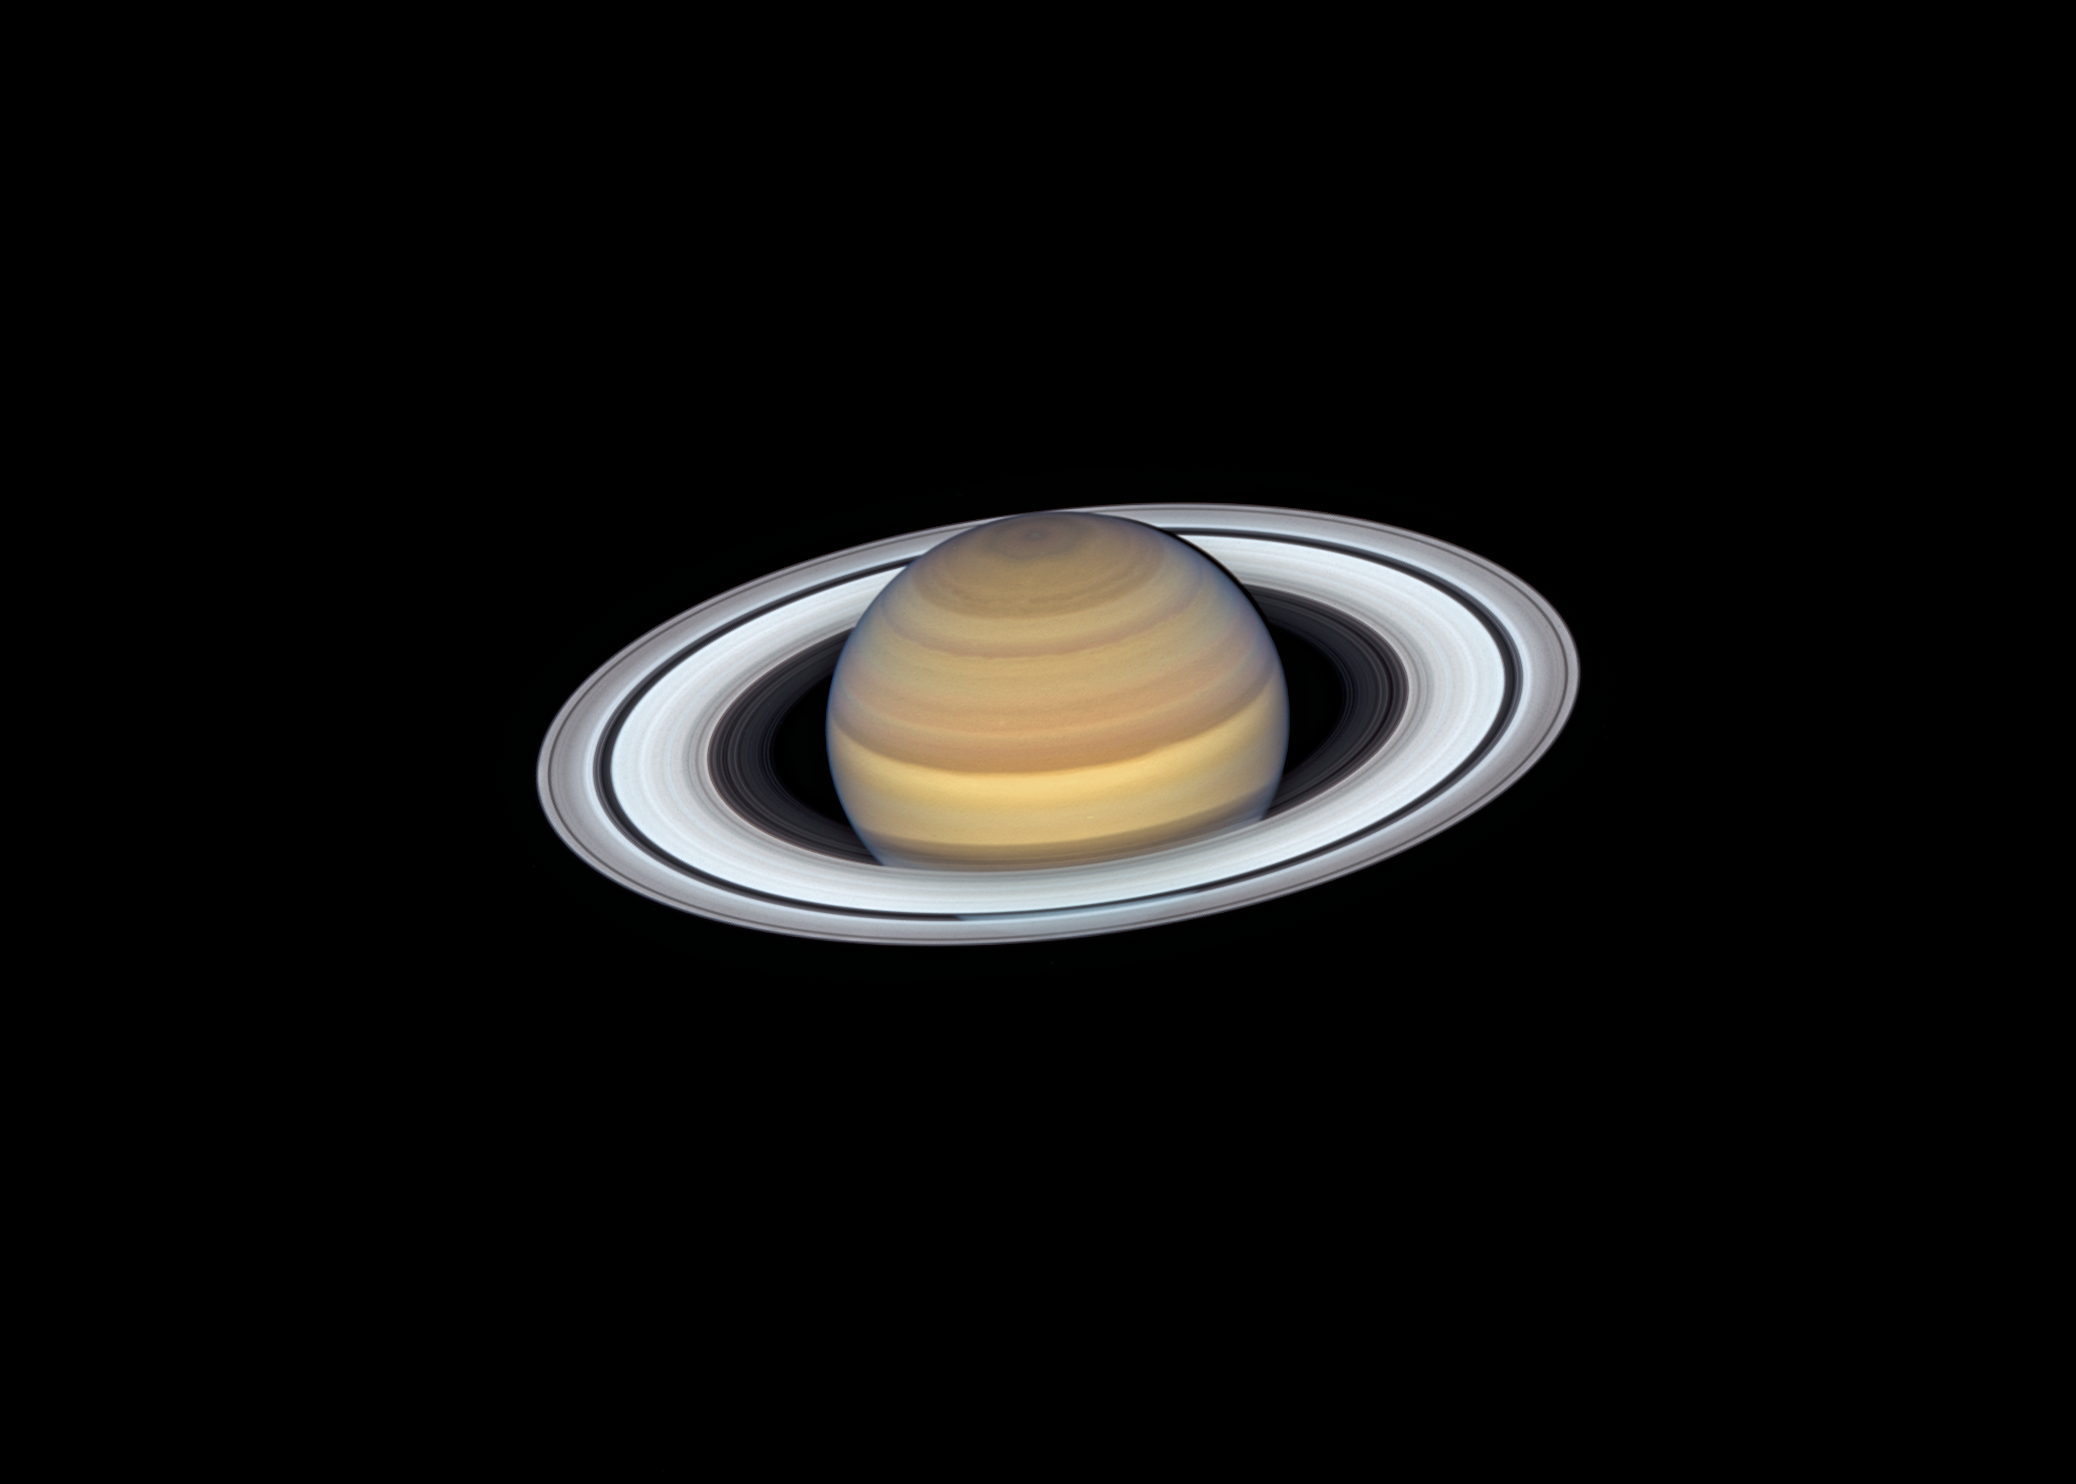 Saturn rings will disappear in 2025